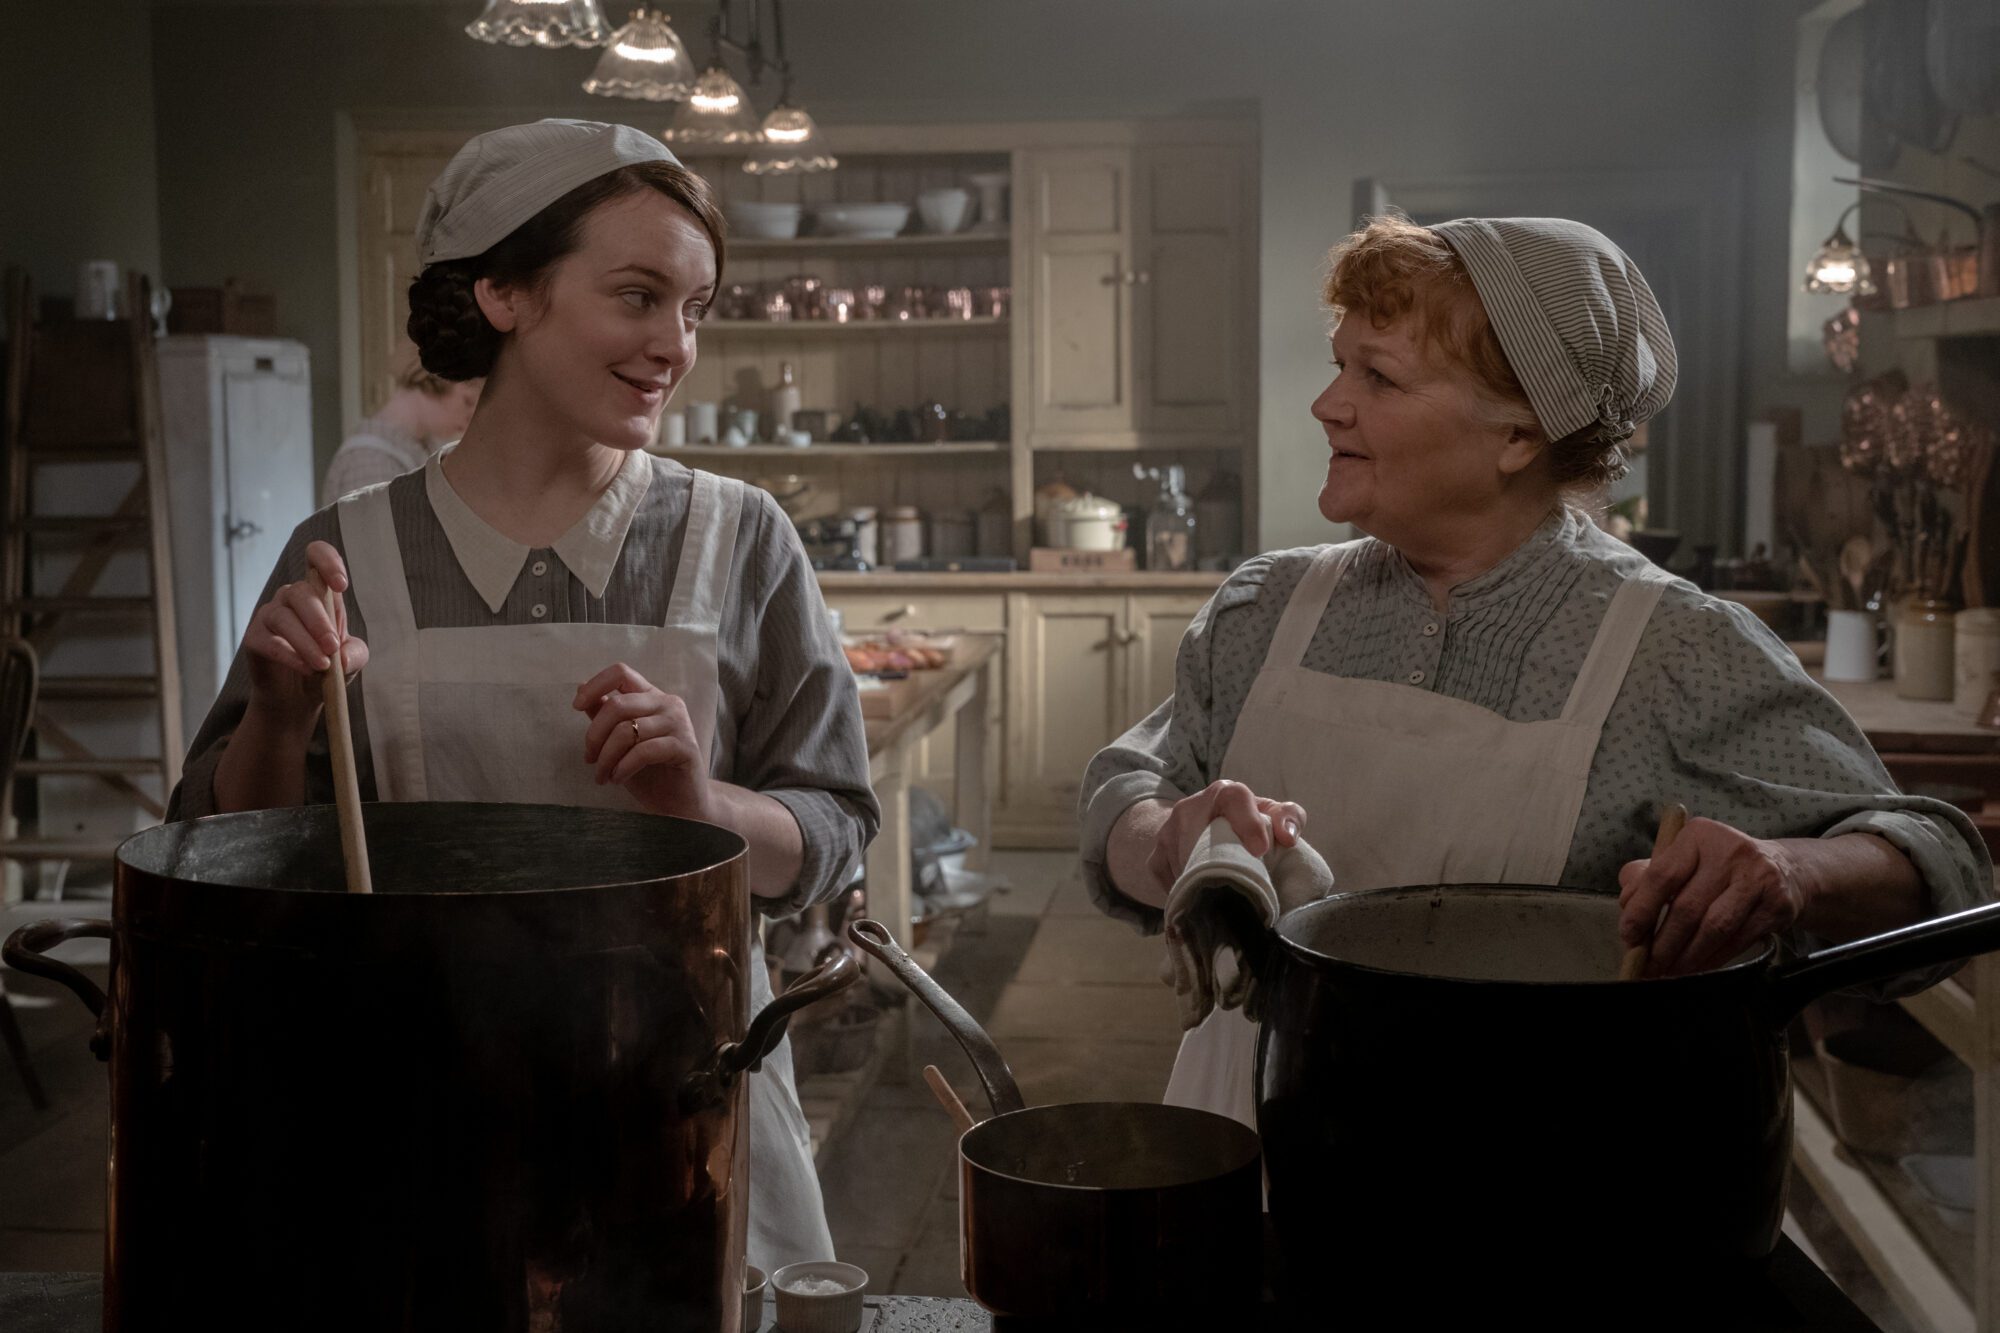 Sophie McShera stars as Daisy and Lesley Nicol stars as Mrs. Patmore in DOWNTON ABBEY